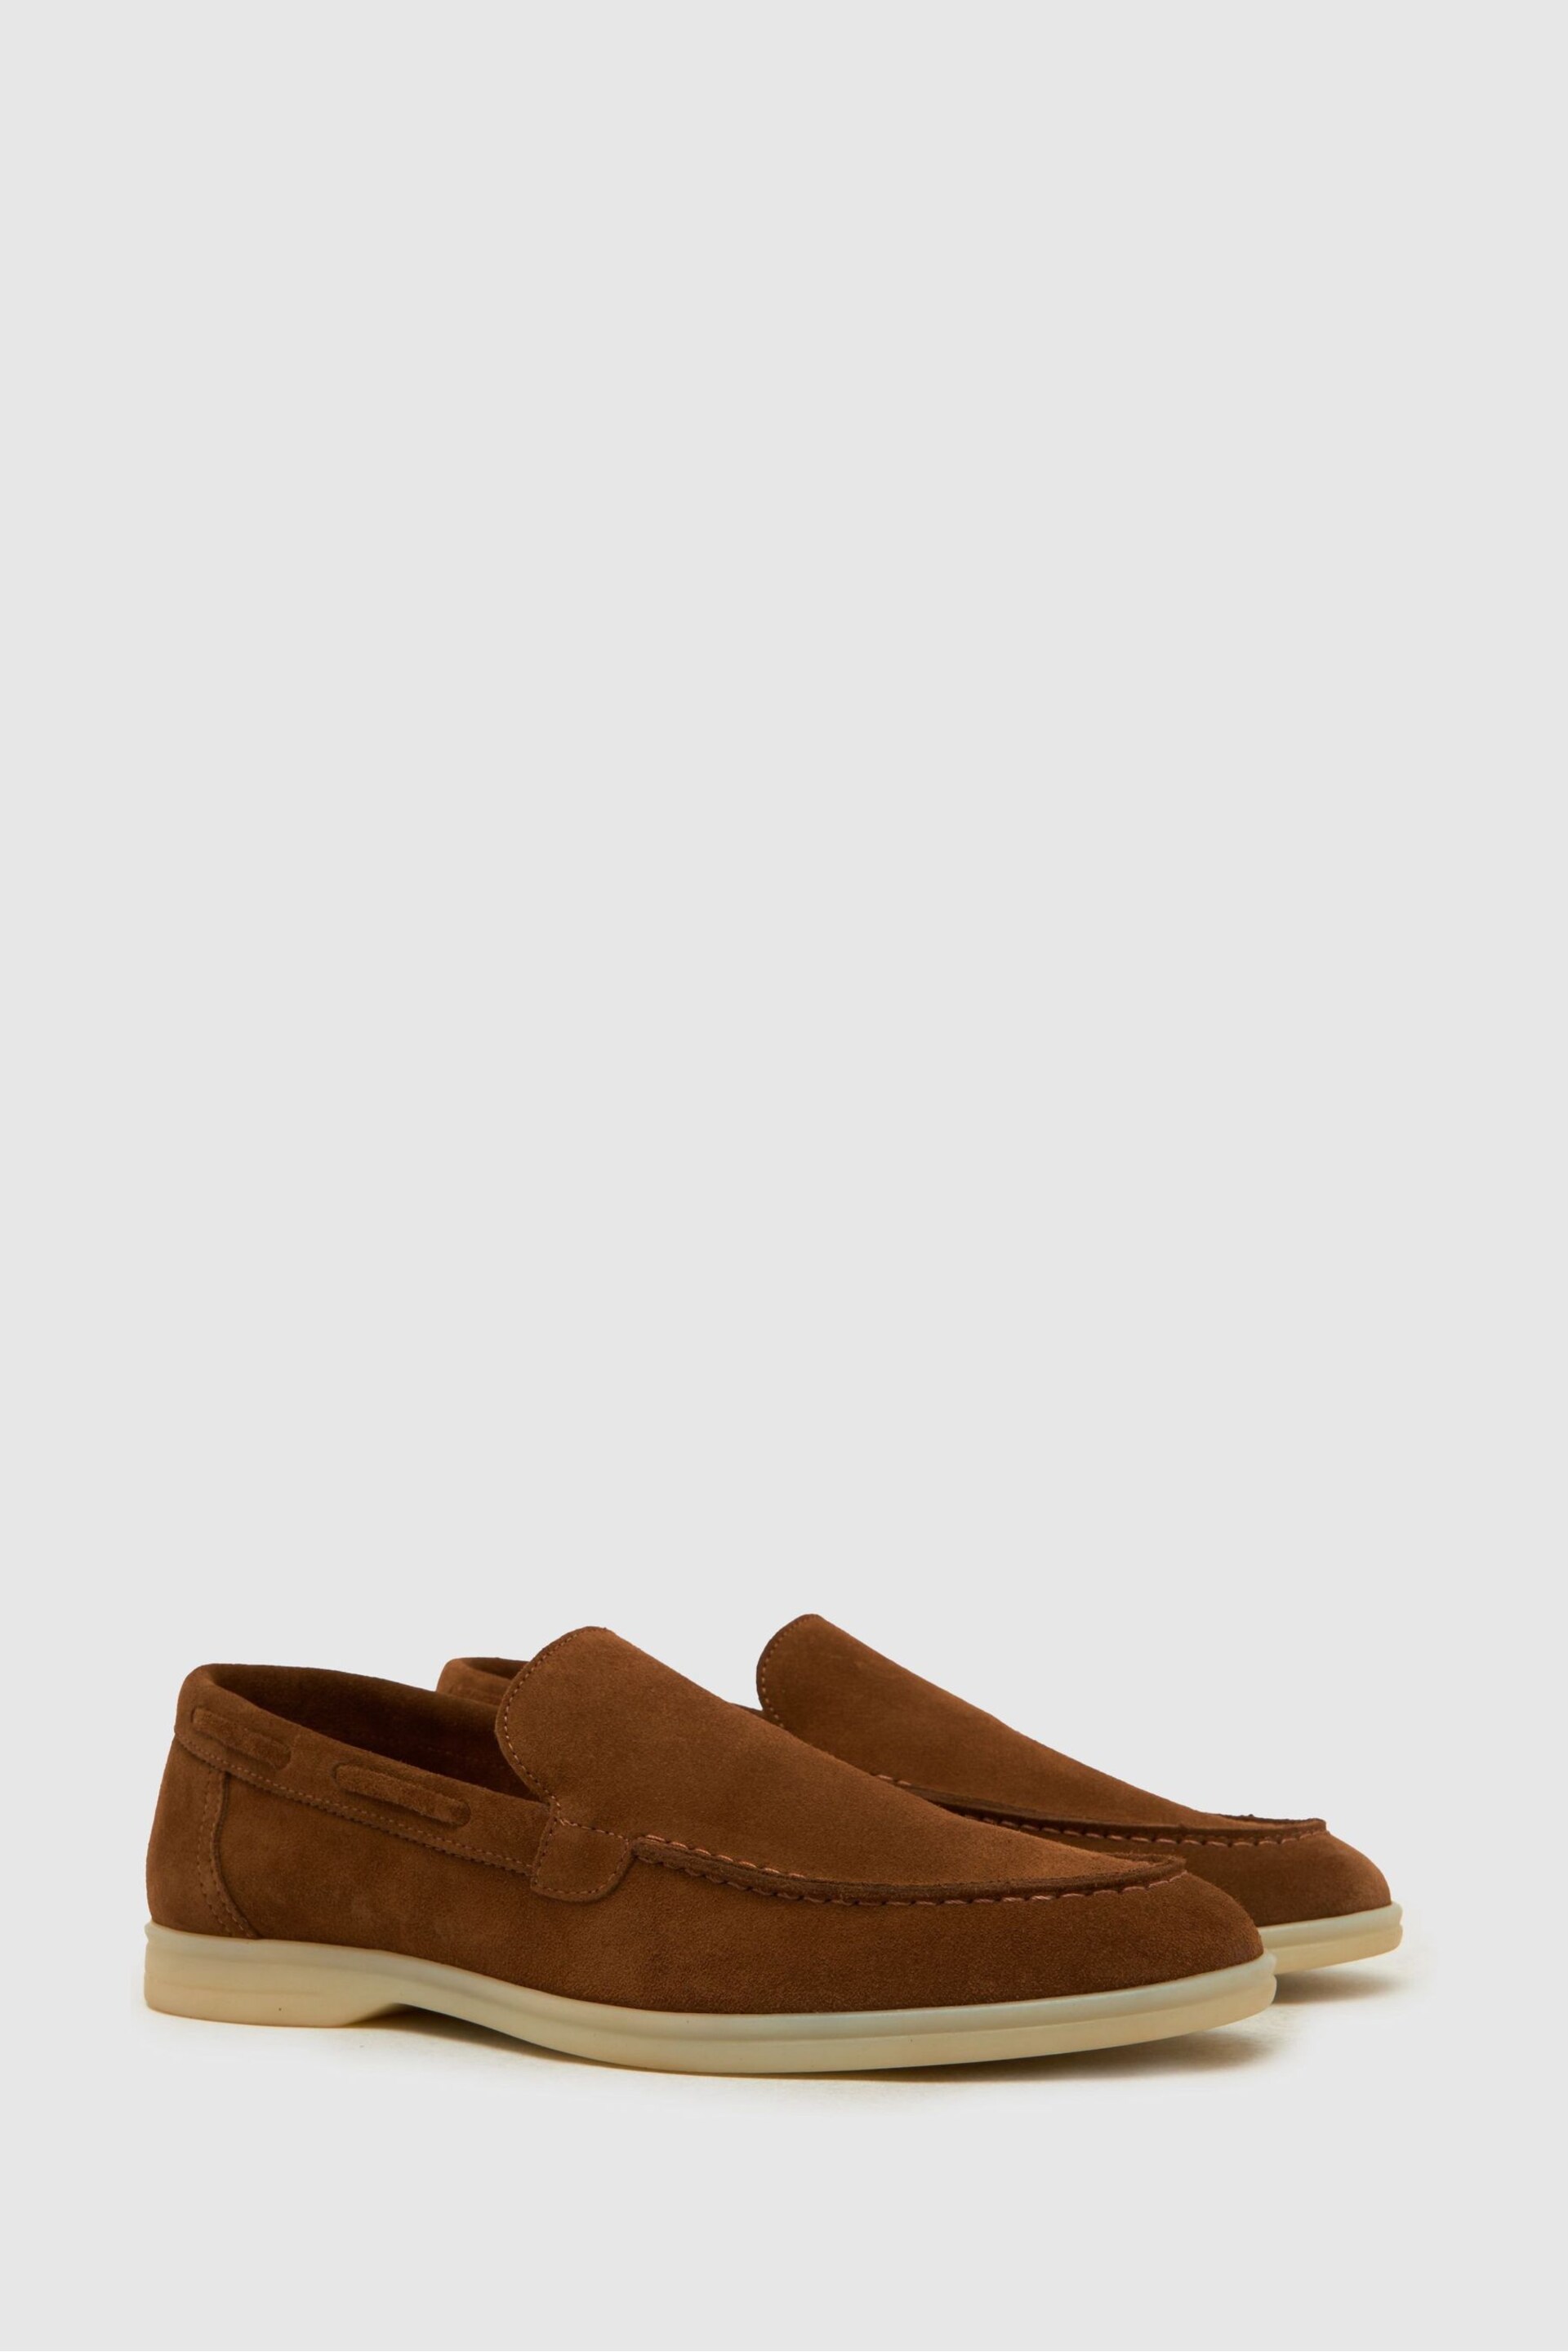 Schuh Phillip Suede Loafers - Image 2 of 4